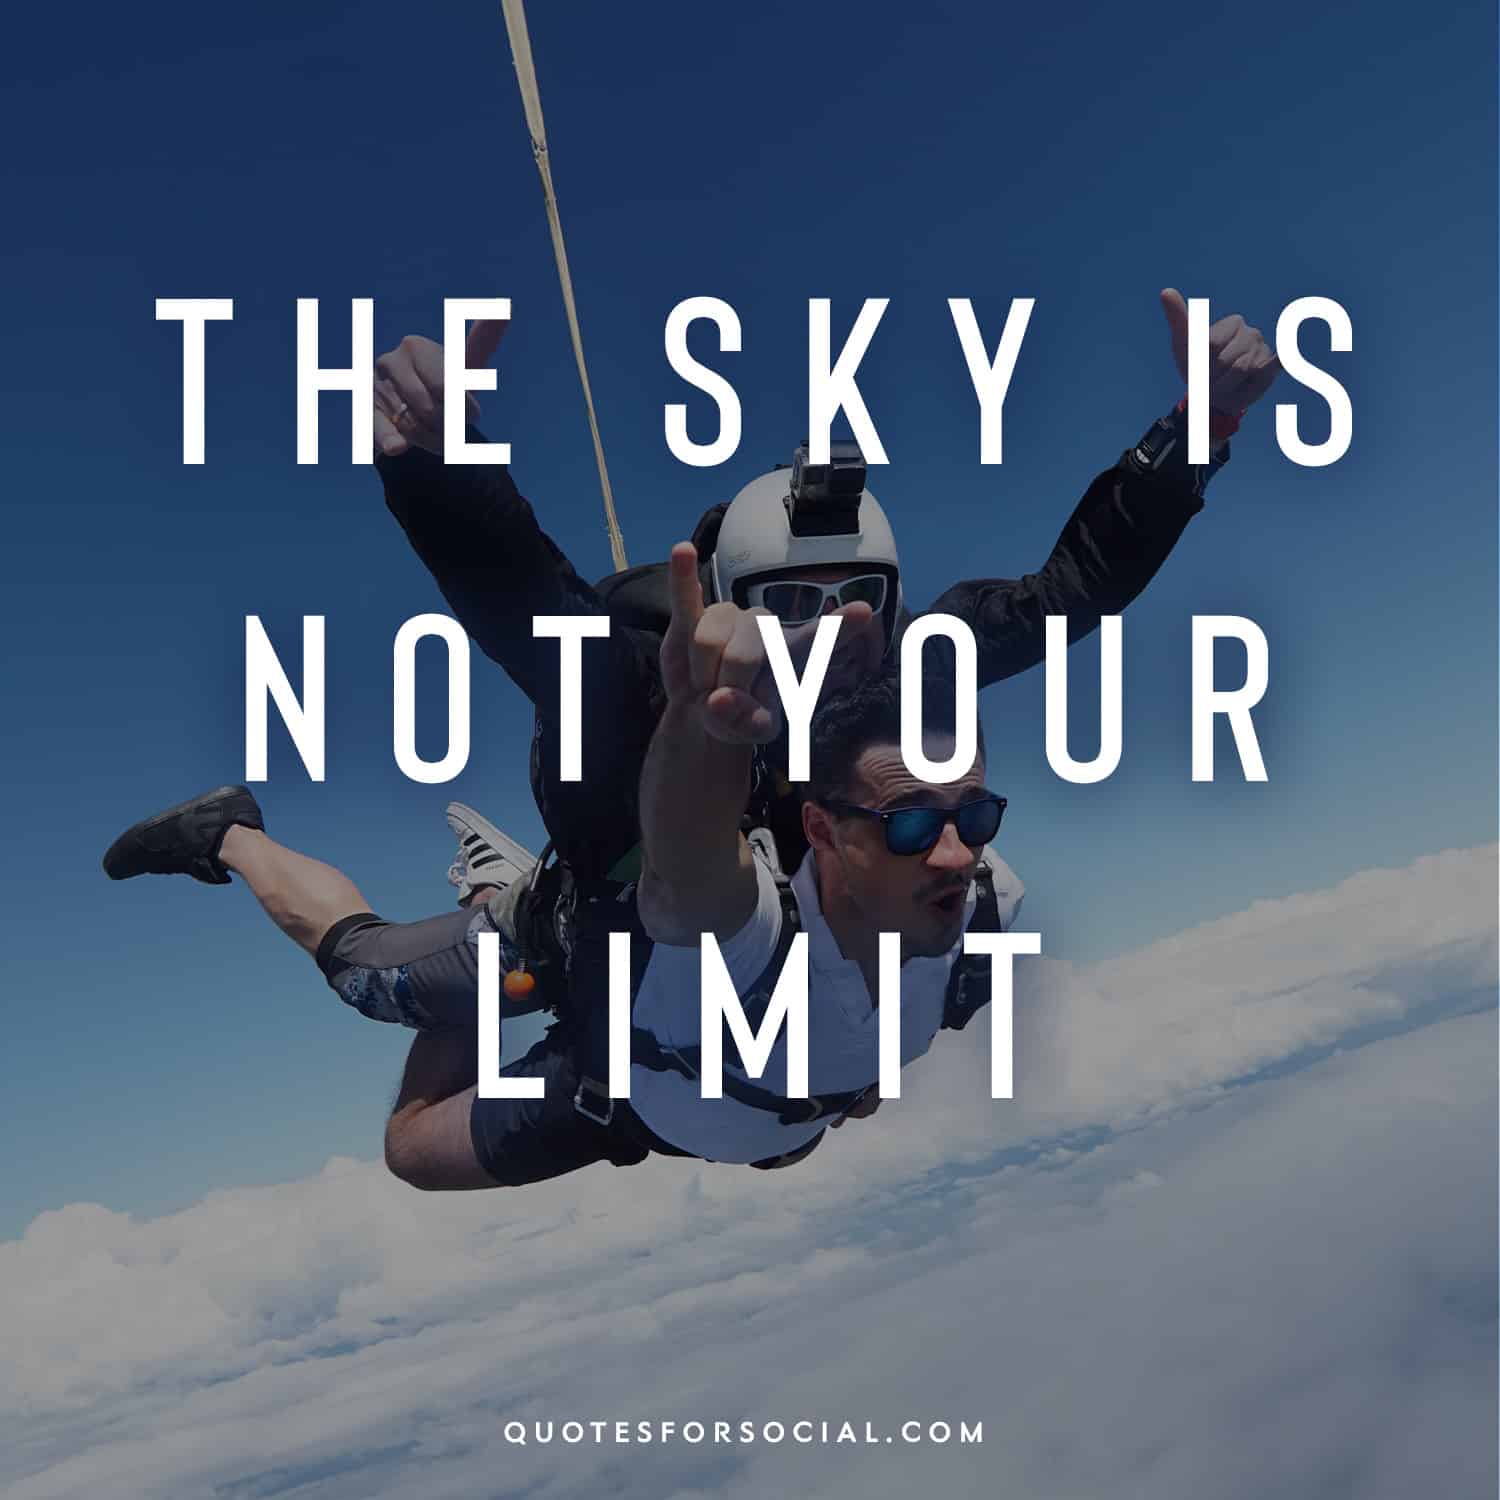 Skydiving Quotes for Instagram